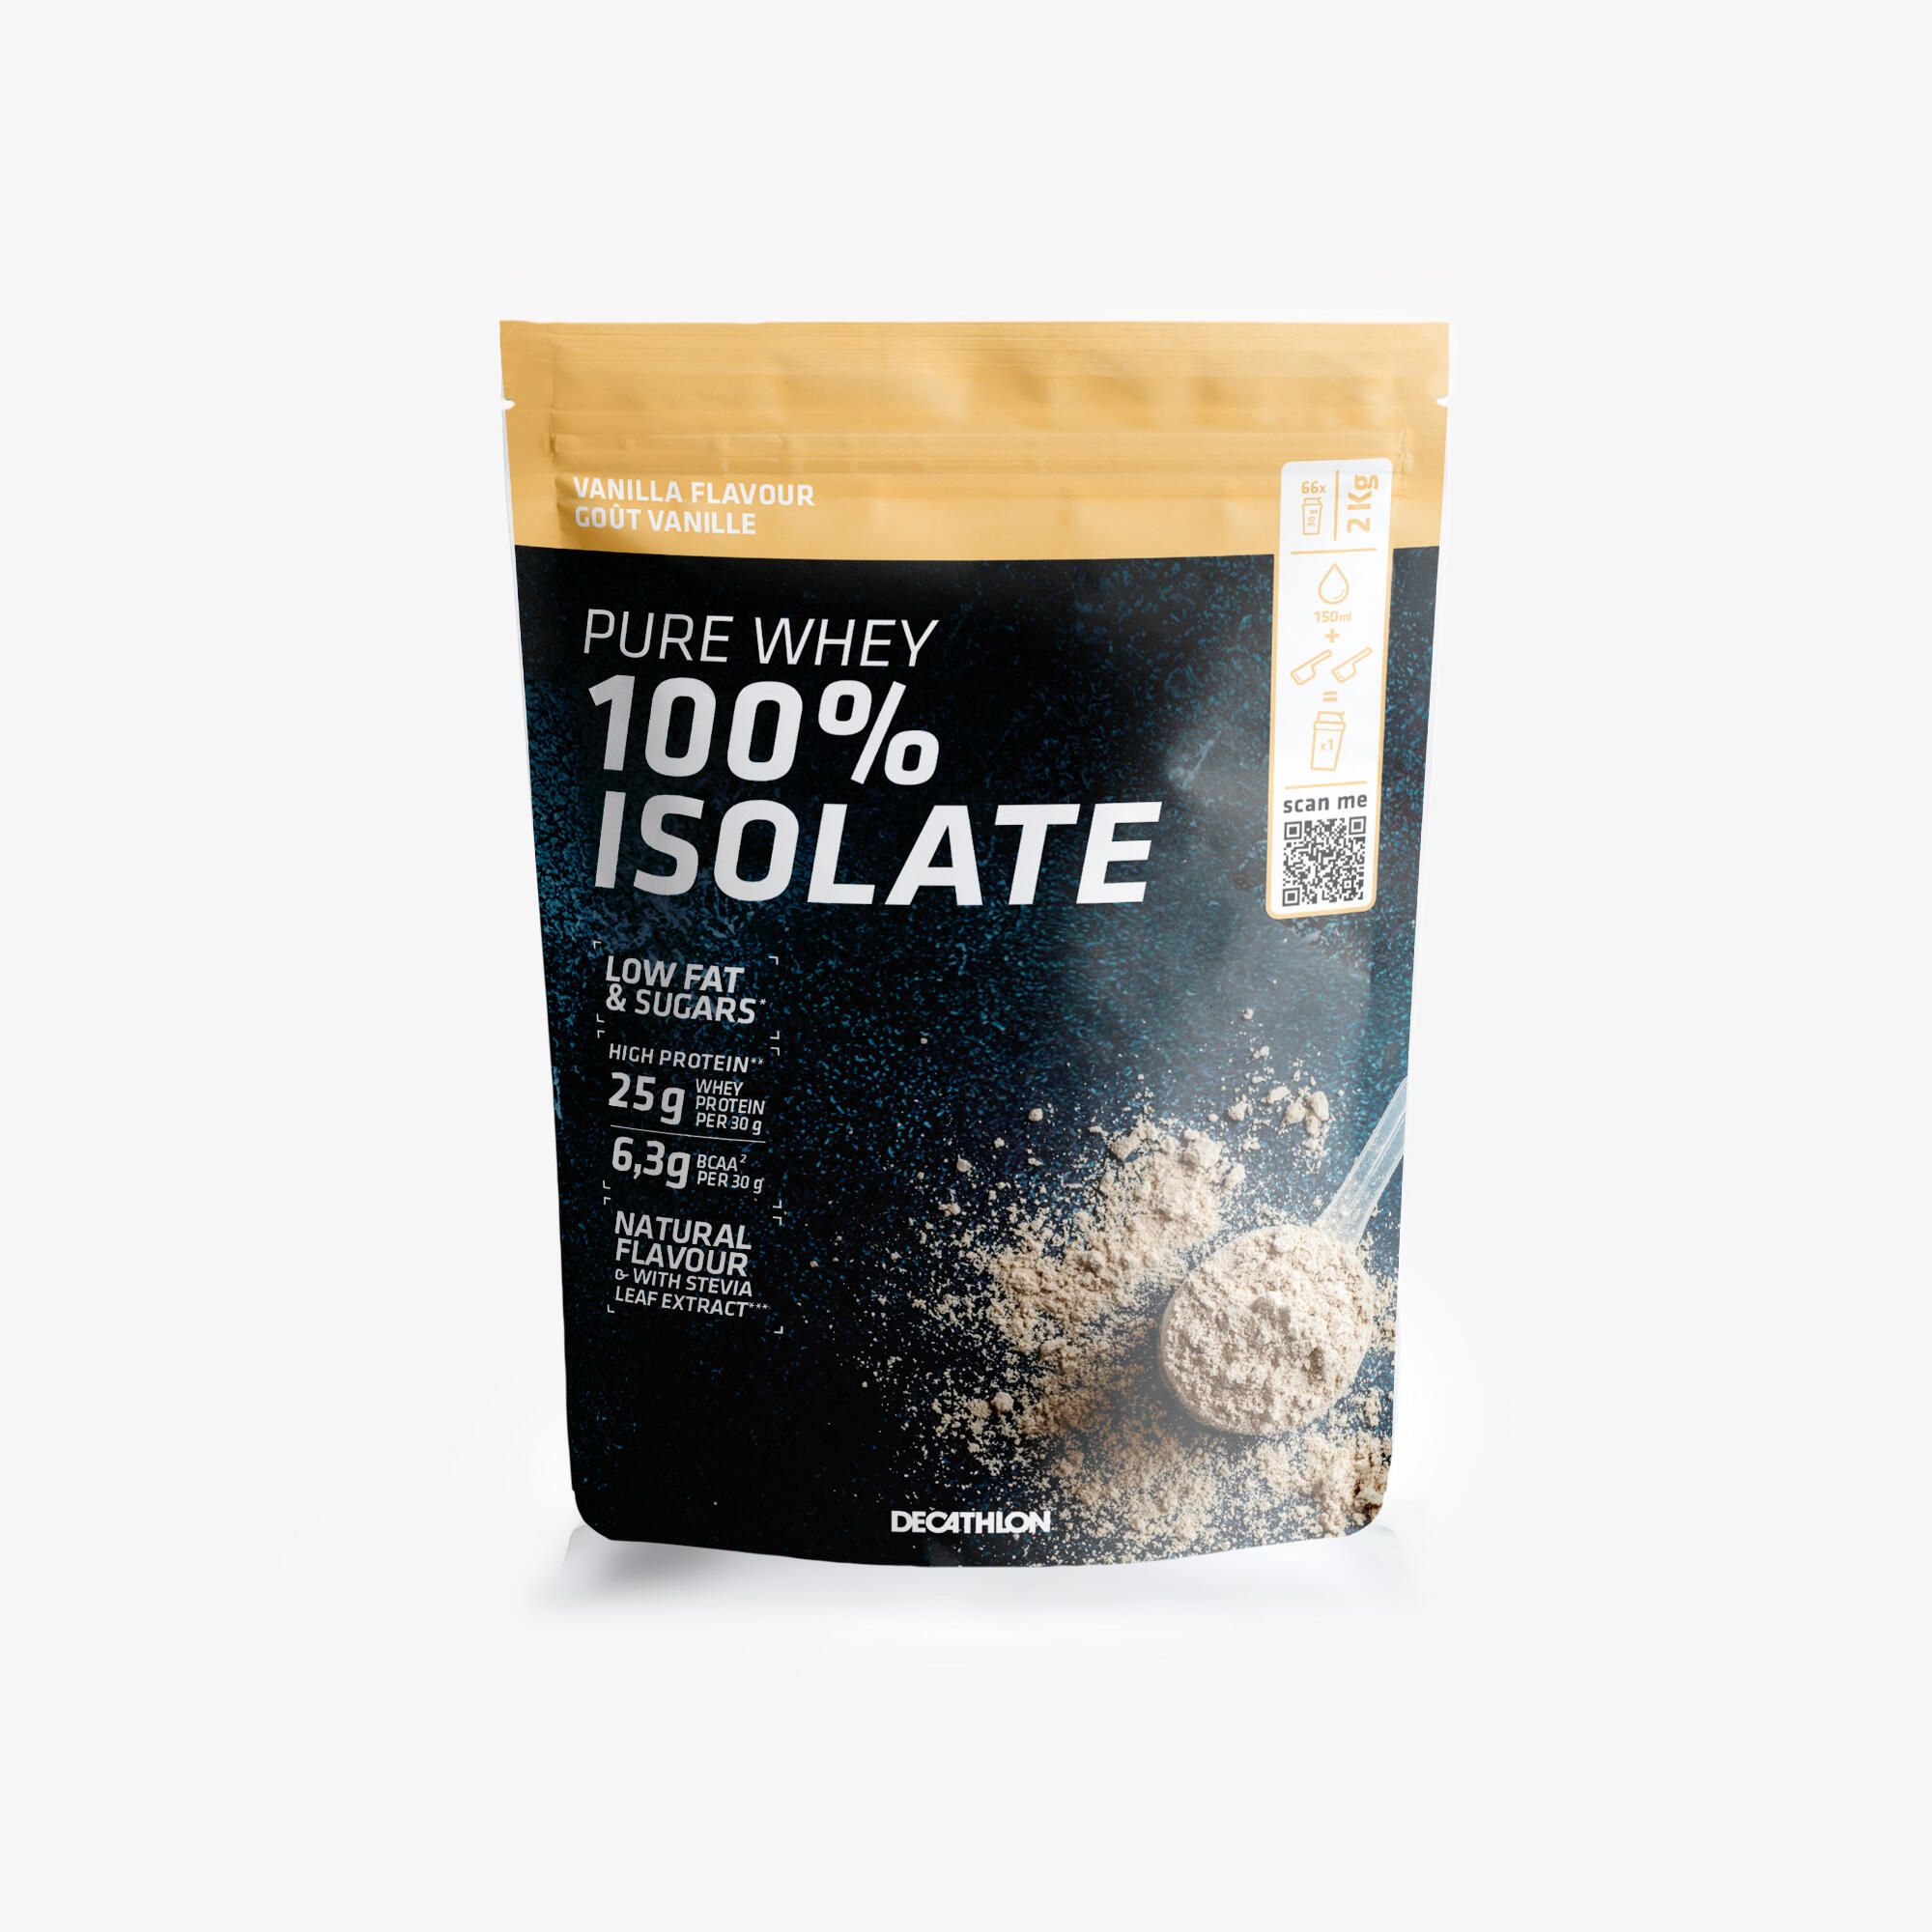 CORENGTH Pure Whey 100% Isolate Go&#xFB;t Vanille, 2kg -